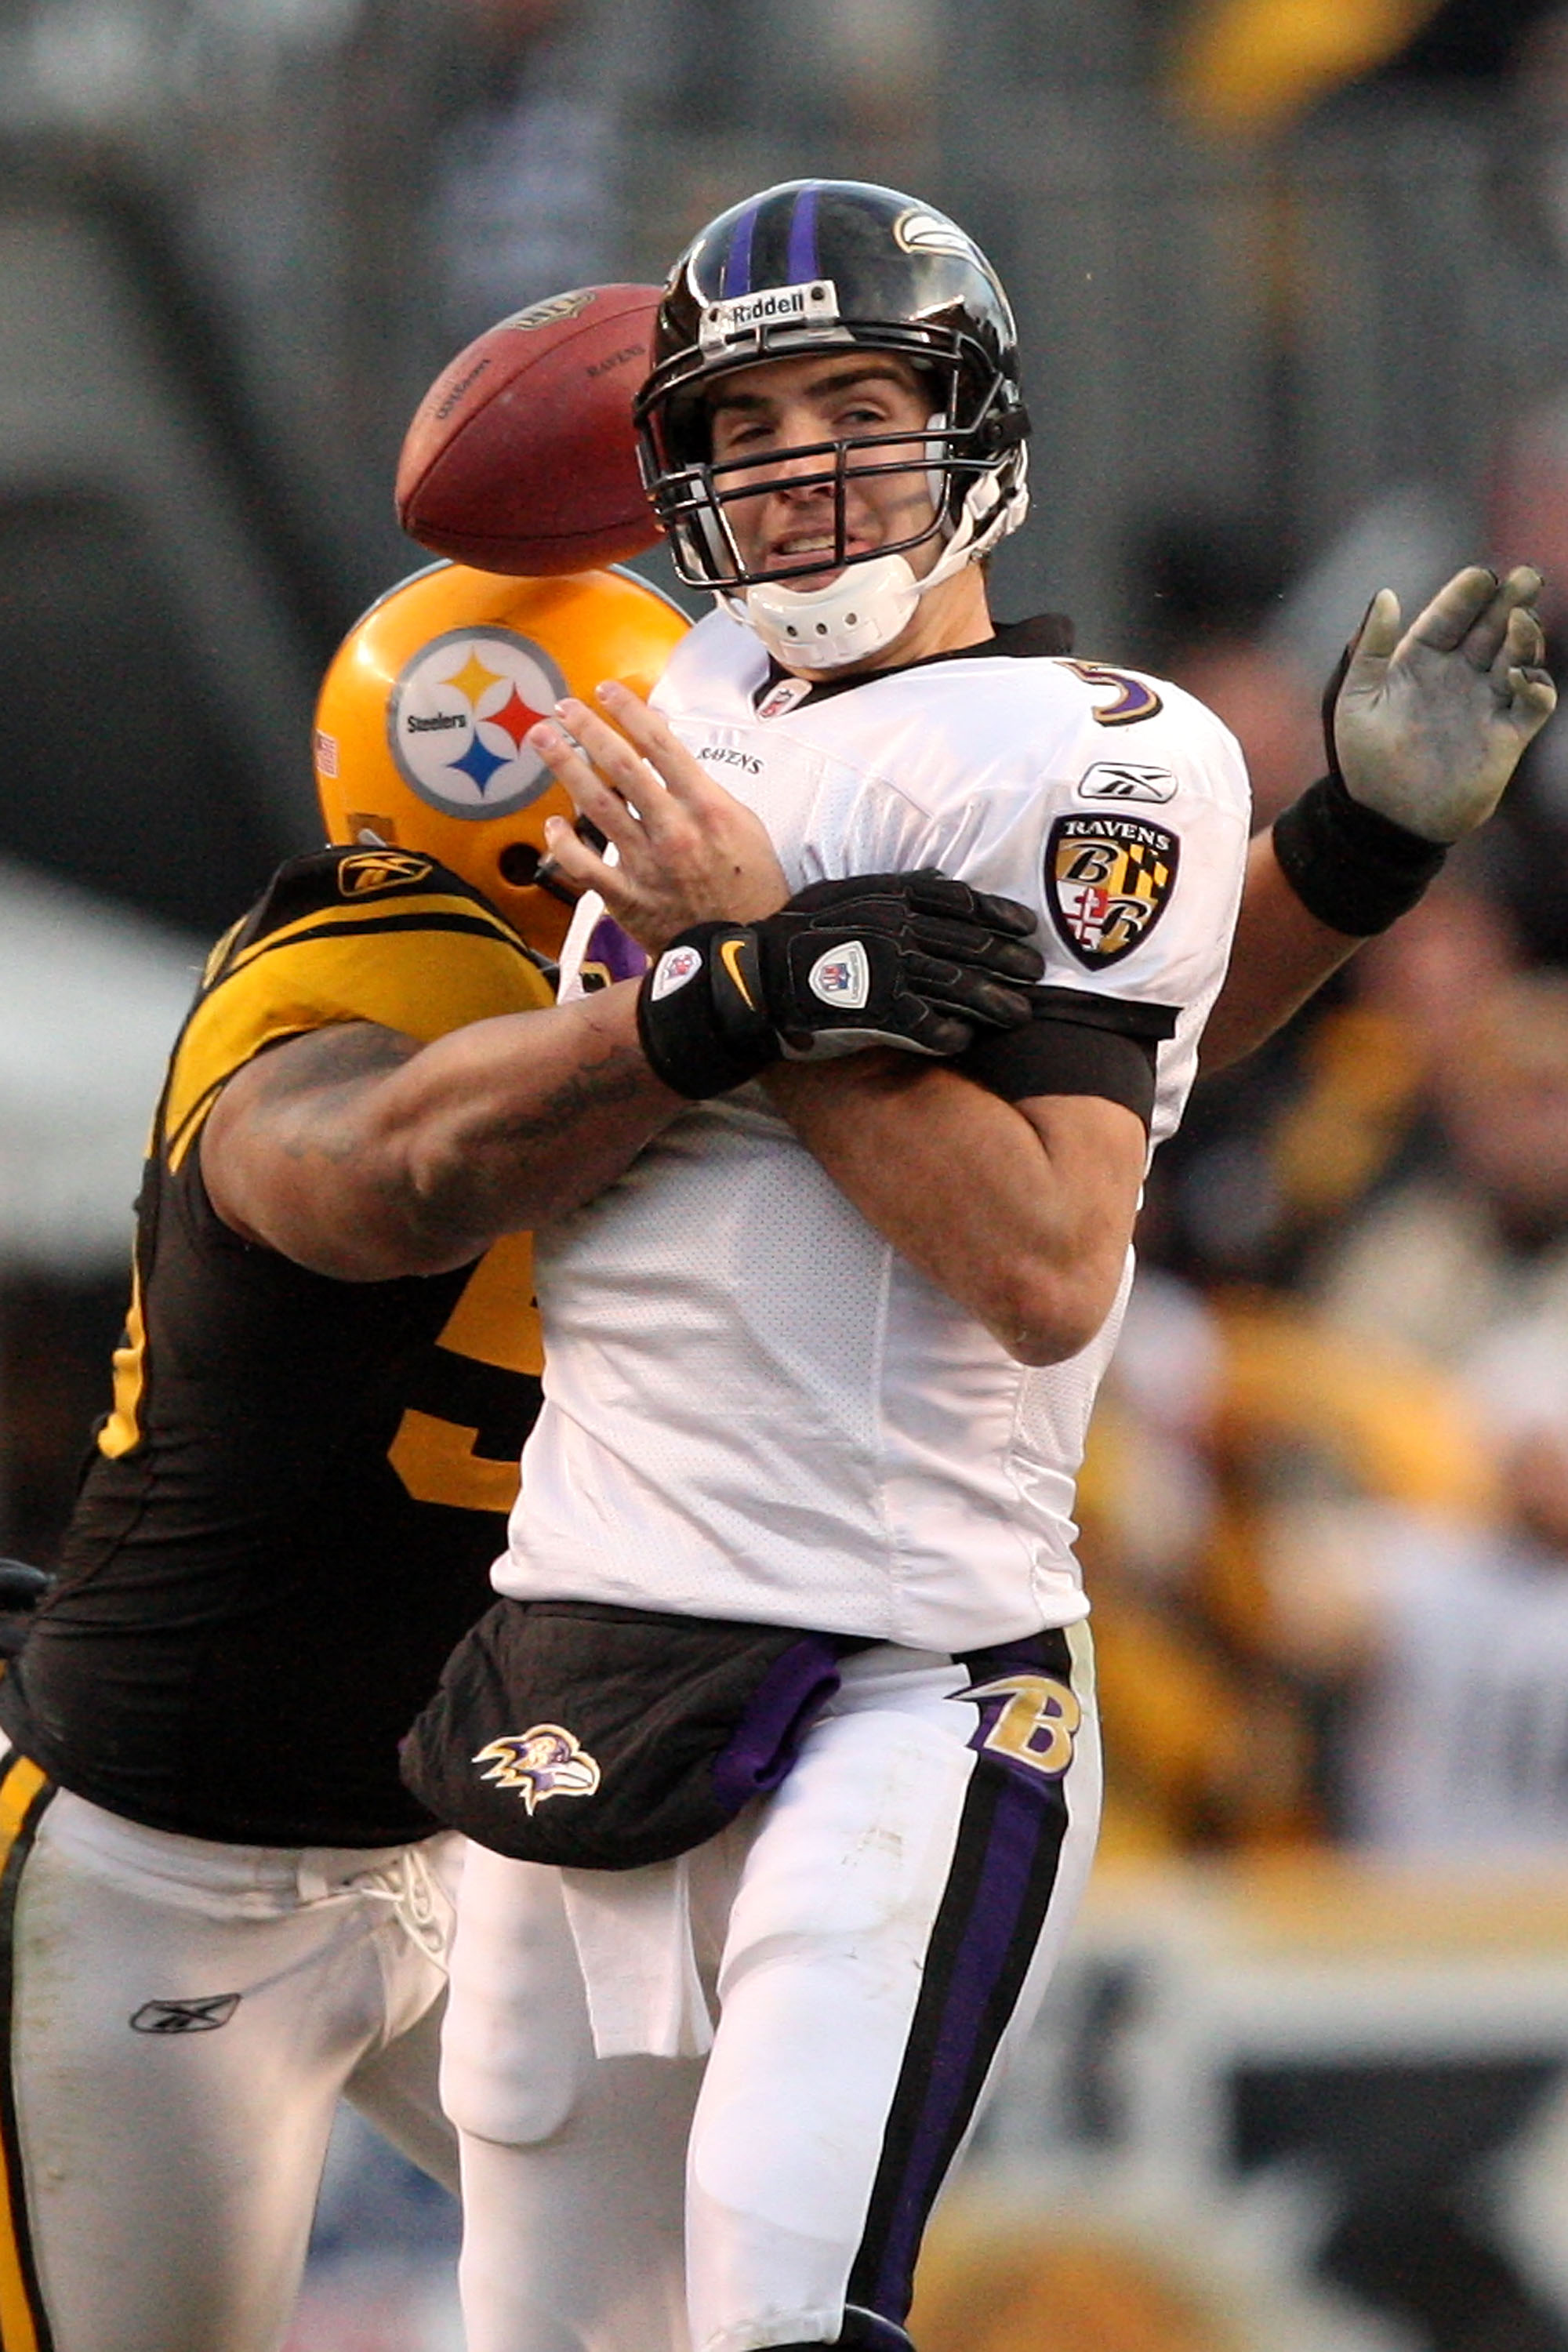 PITTSBURGH - DECEMBER 27:  LaMarr Woodley #56 of the Pittsburgh Steelers forces Joe Flacco #5 of the Baltimore Ravens to fumble during the game at Heinz Field on December 27, 2009 in Pittsburgh, Pennsylvania.  Pittsburgh won the game, 23-20. (Photo by Kar